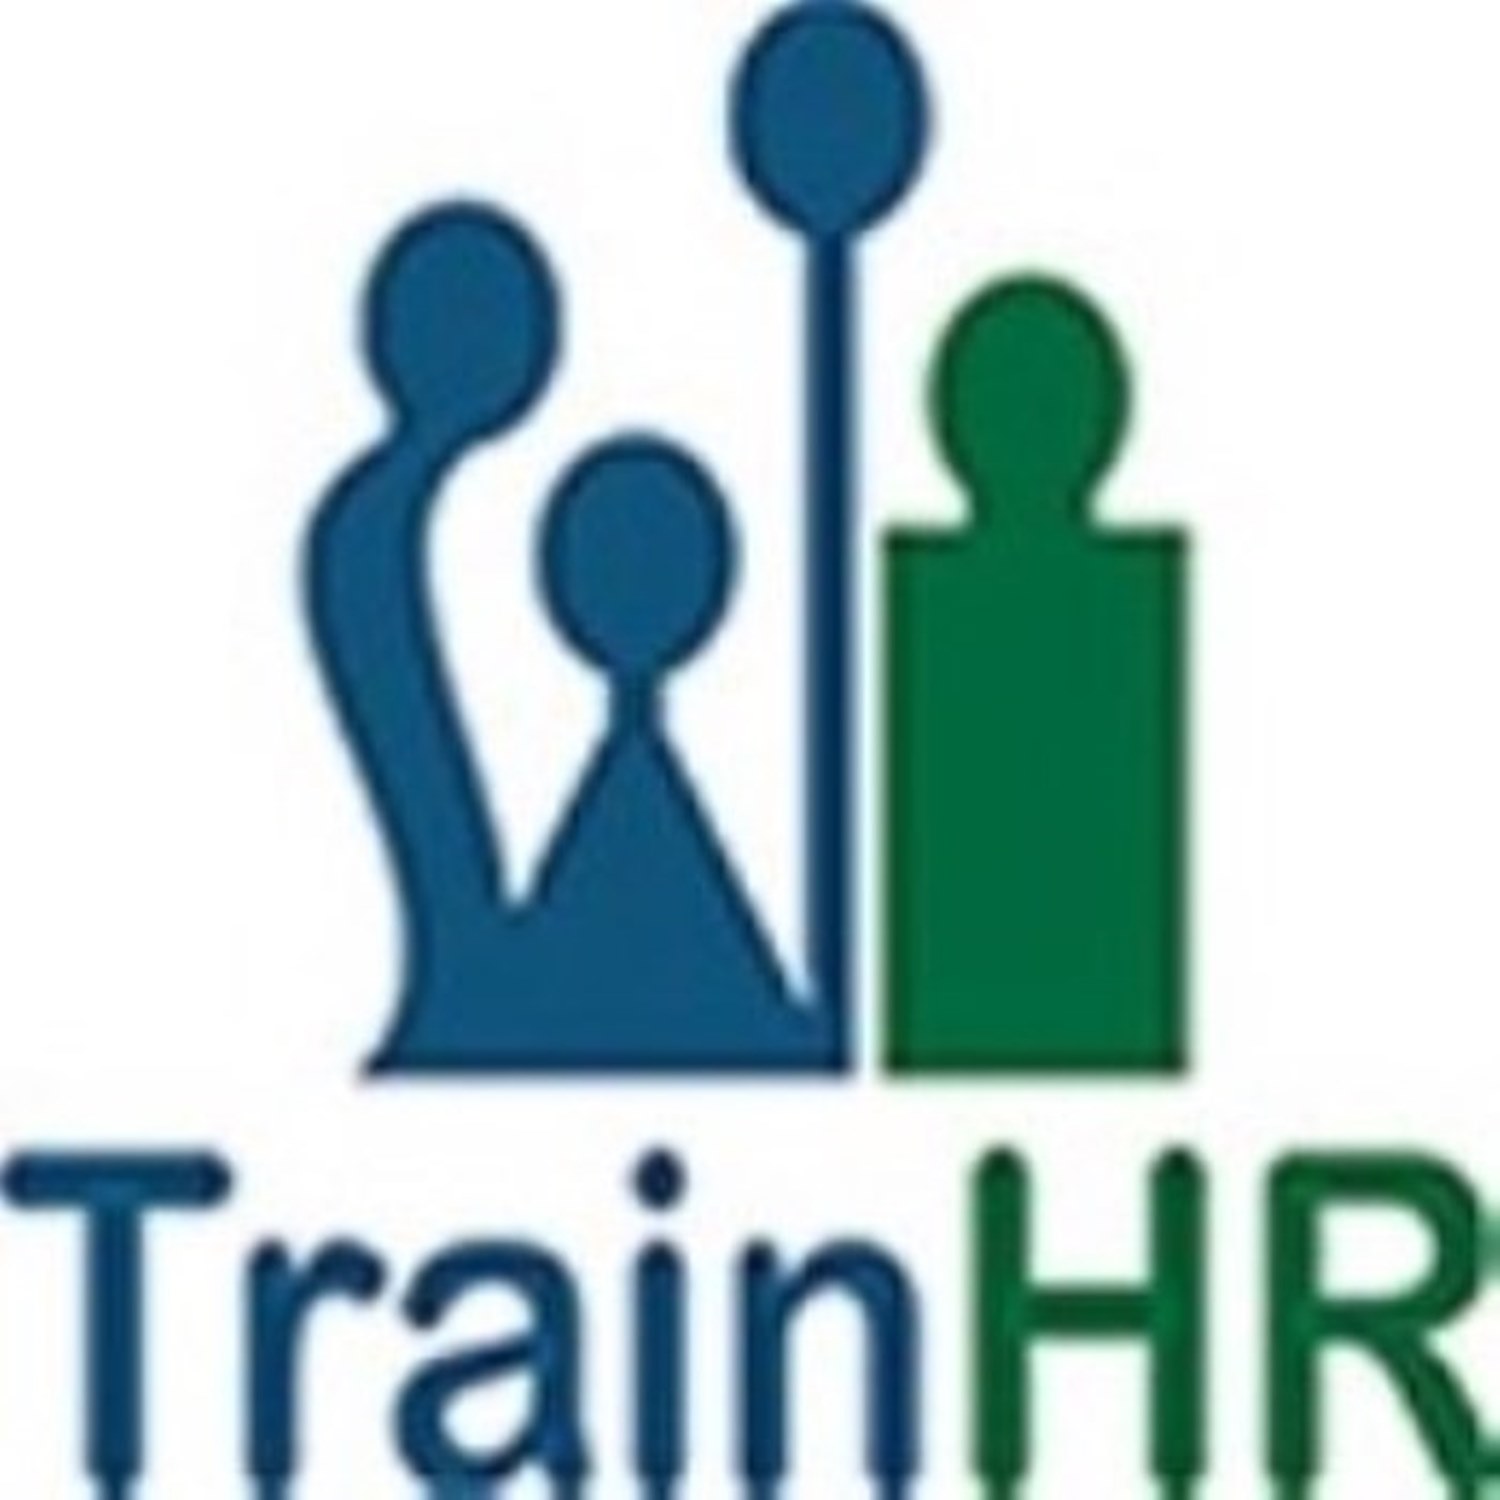 TrainHR is conducting a Webinar on Delivering Exceptional Customer Service, Fremont, California, United States